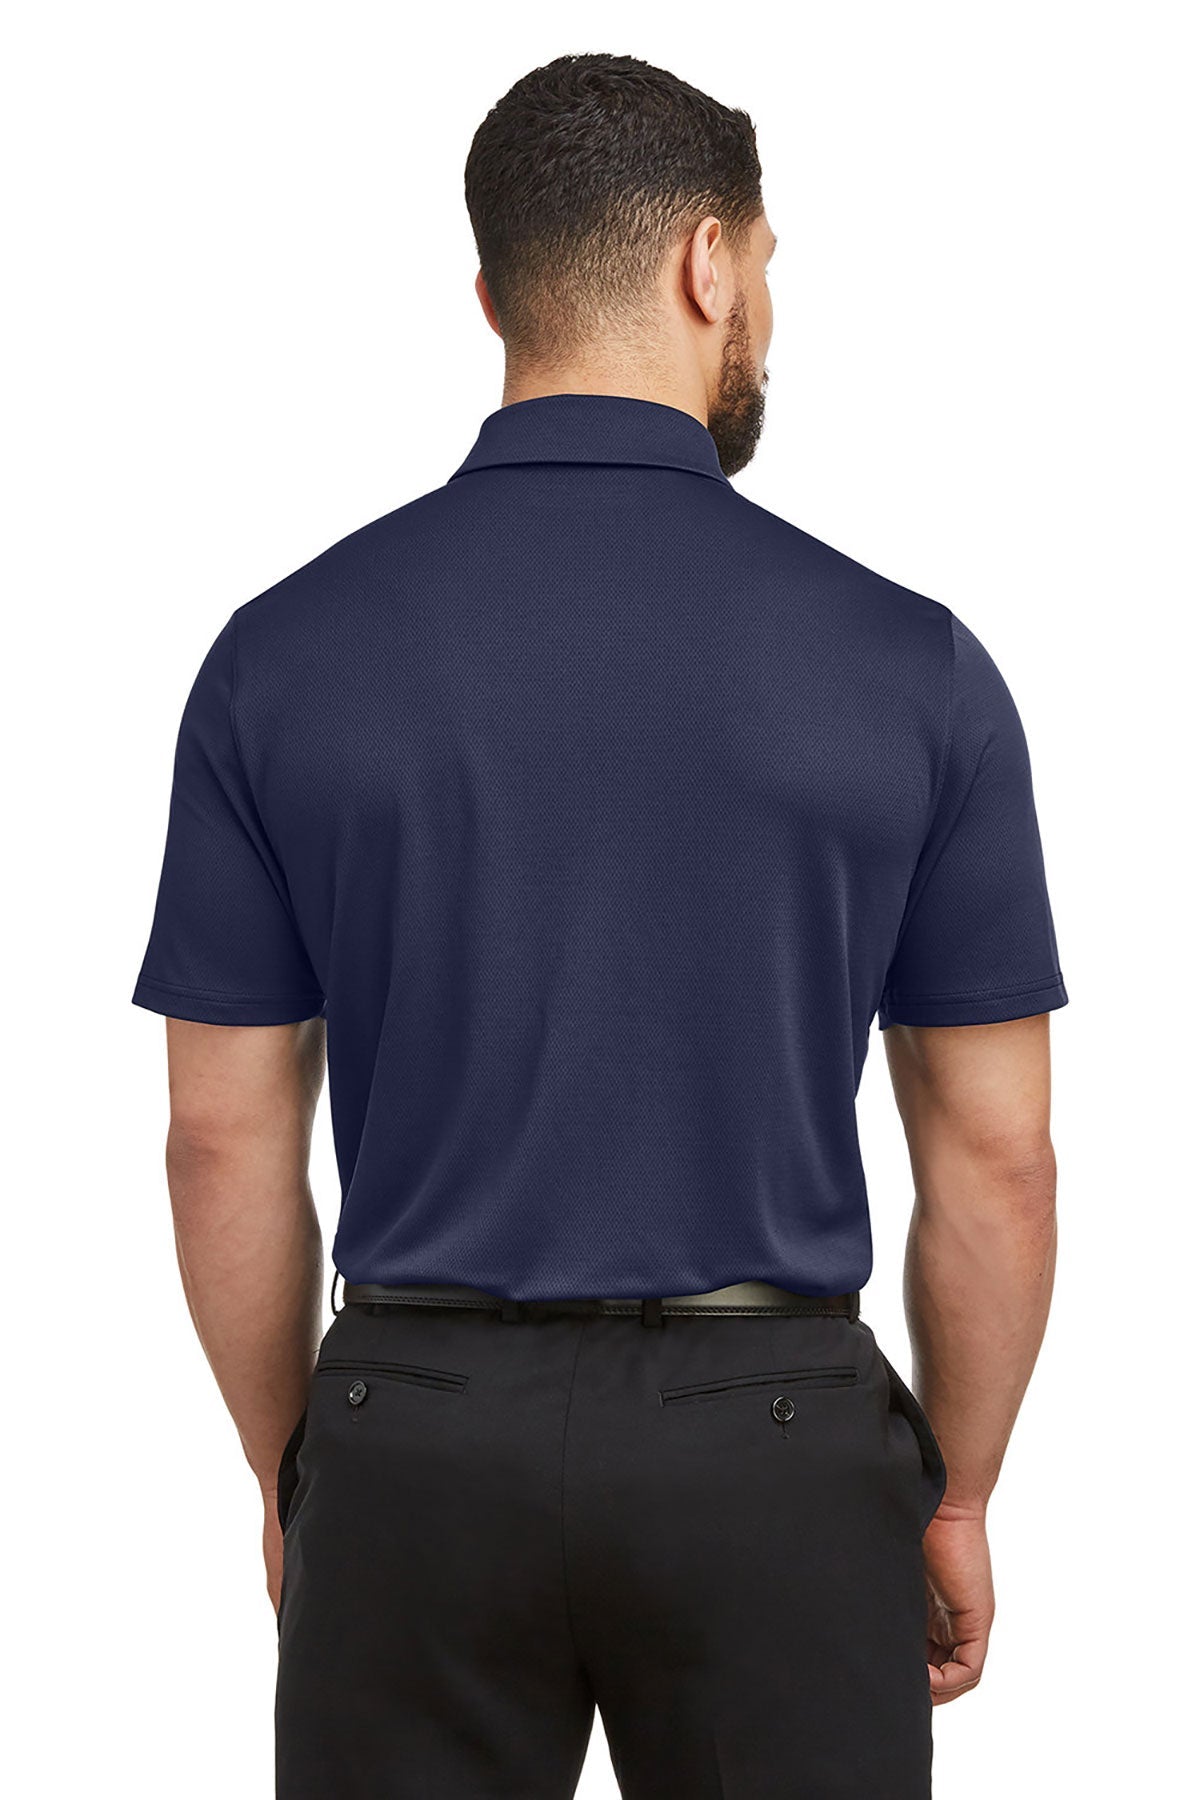 Under Armour Men's Tech Polo, Mid Navy [GuidePoint Security]